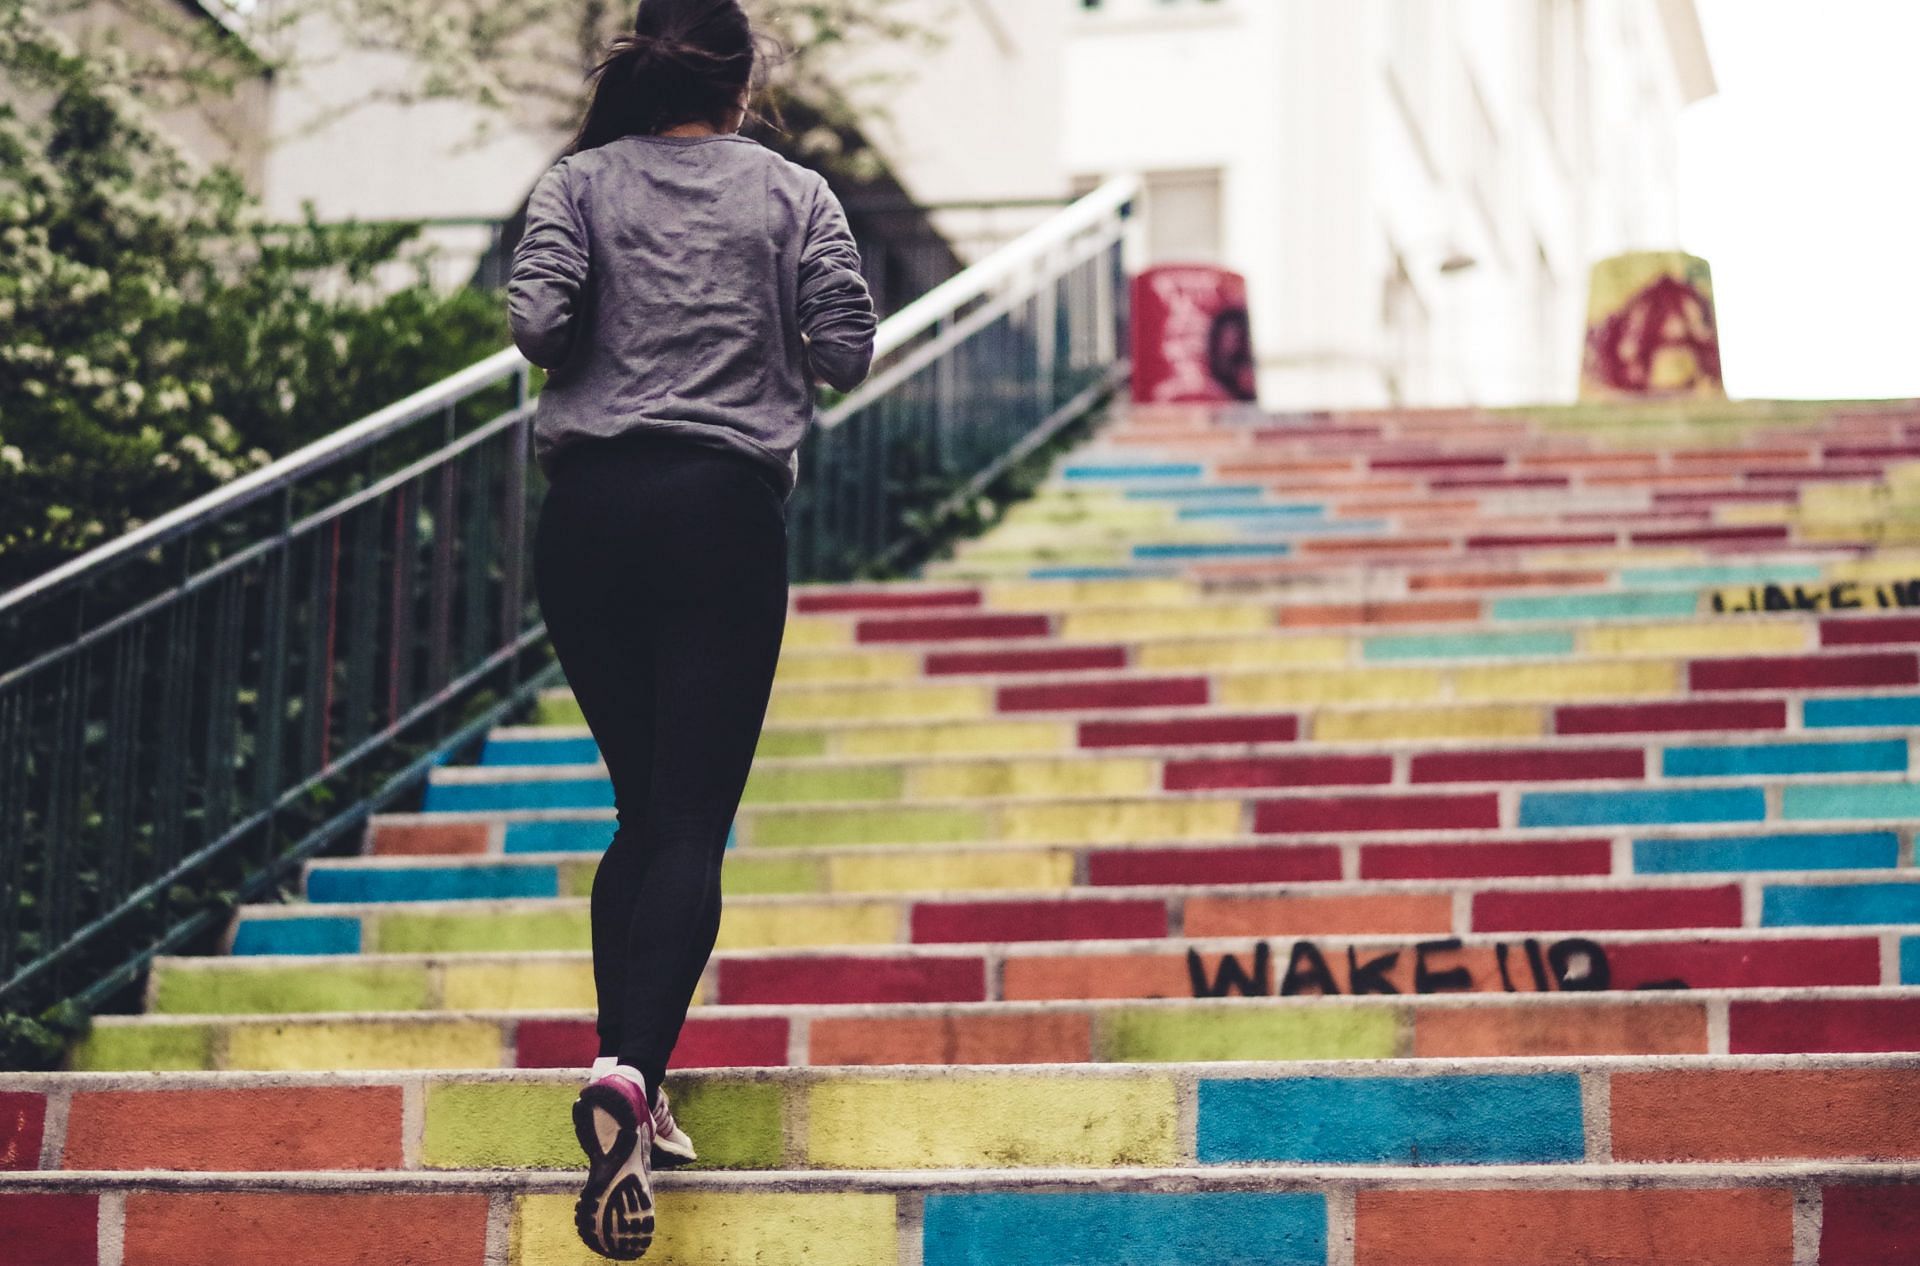 Stay active by bringing minor changes to your daily activities. (Image via Unsplash/Ev)